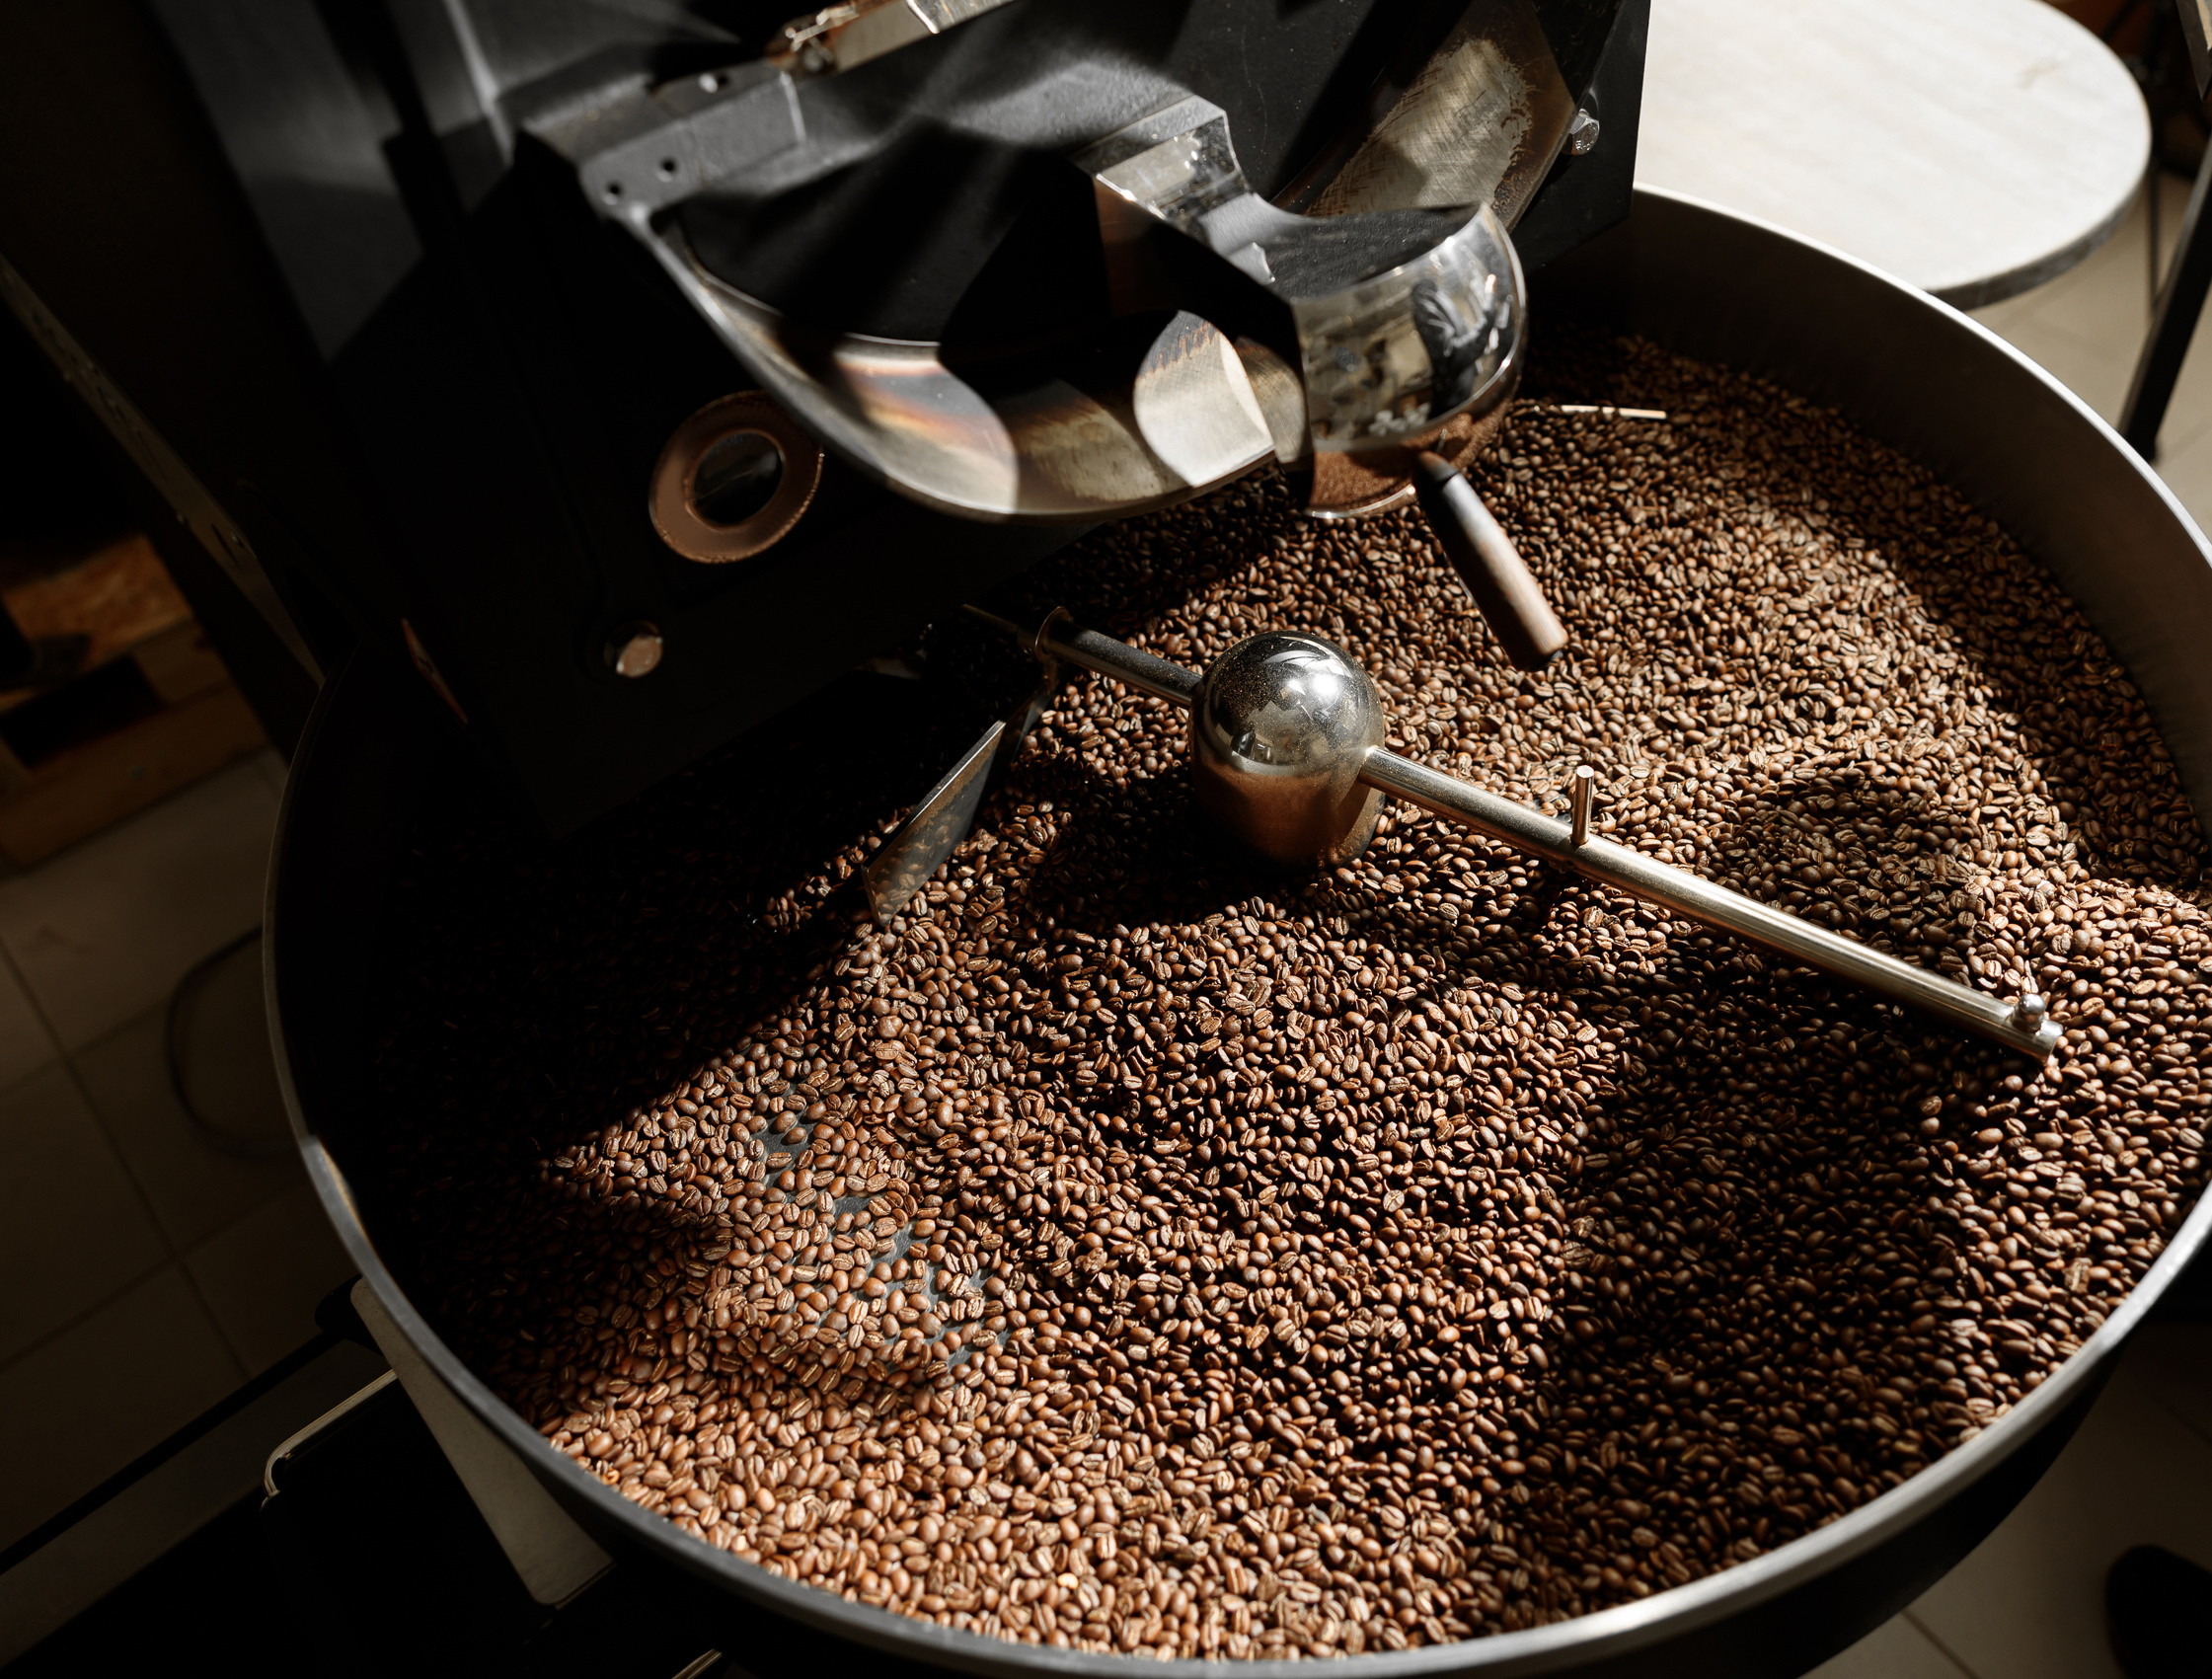 Coffee Processing. Roastery, Roasting Machine and Fresh Beans